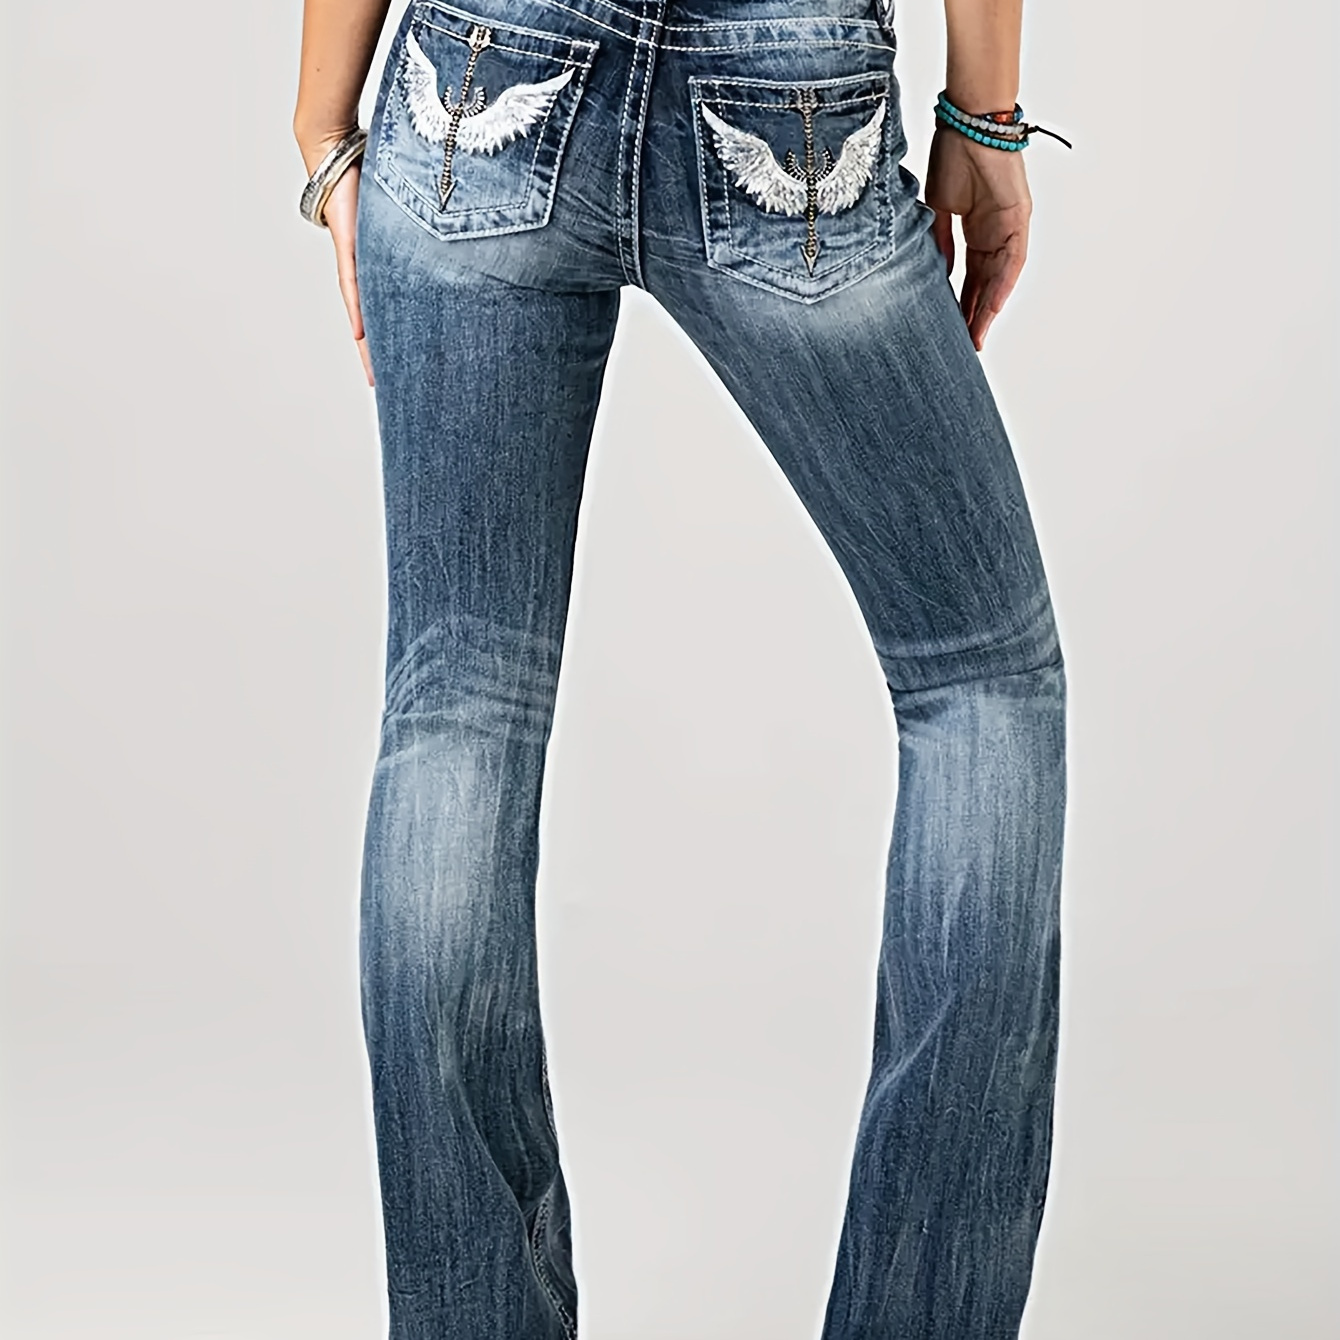 

Women's Fashion Bootcut Jeans, Casual Style, Slim Fit, Flared Leg, Denim Pants With Wings Pocket Detailing